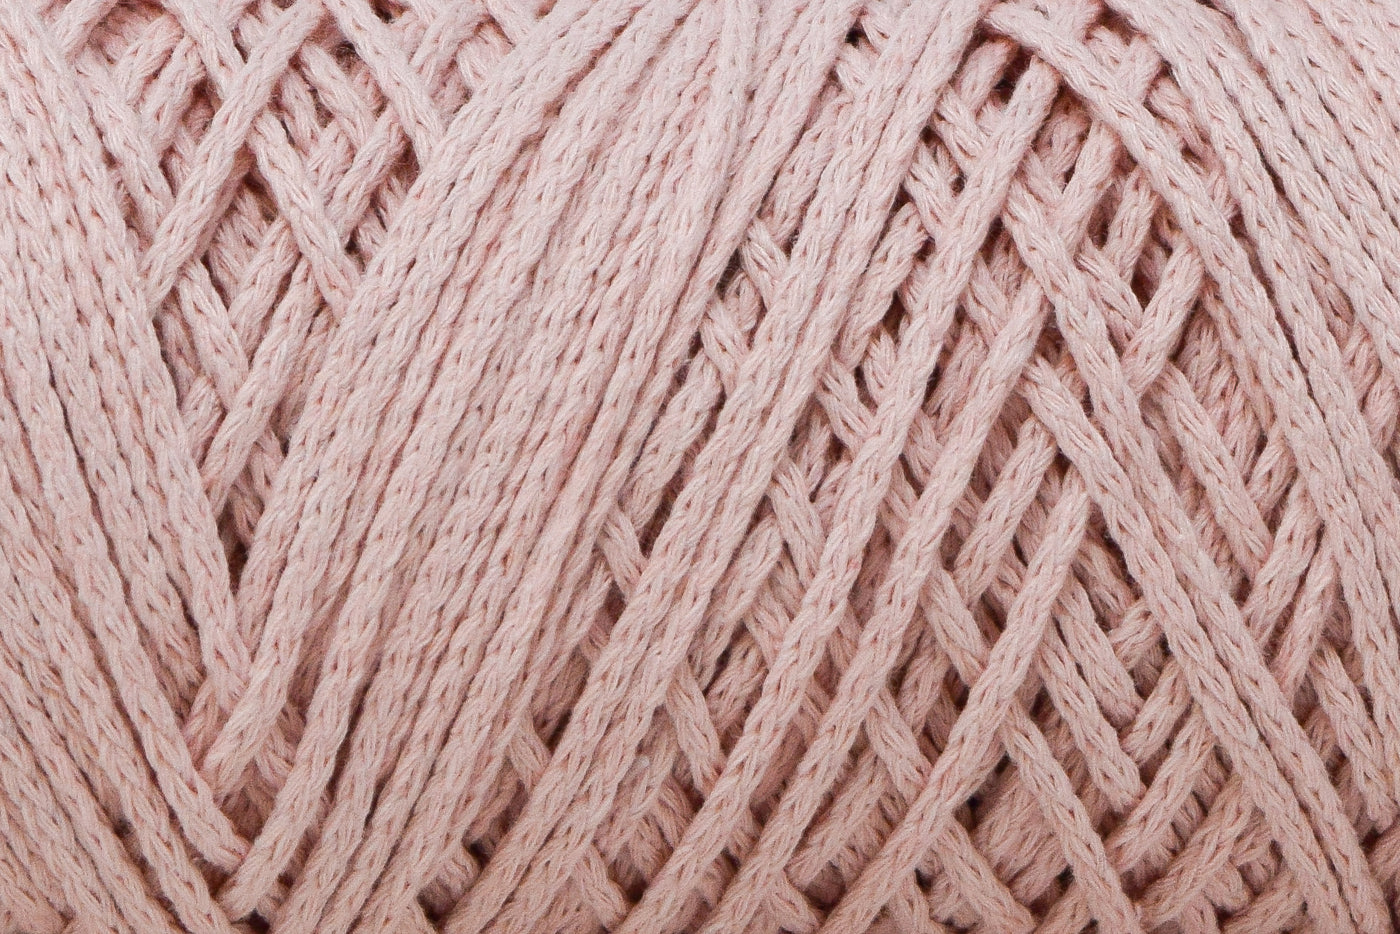 BRAIDED CORD 2 MM ZERO WASTE -  PALE PINK COLOR